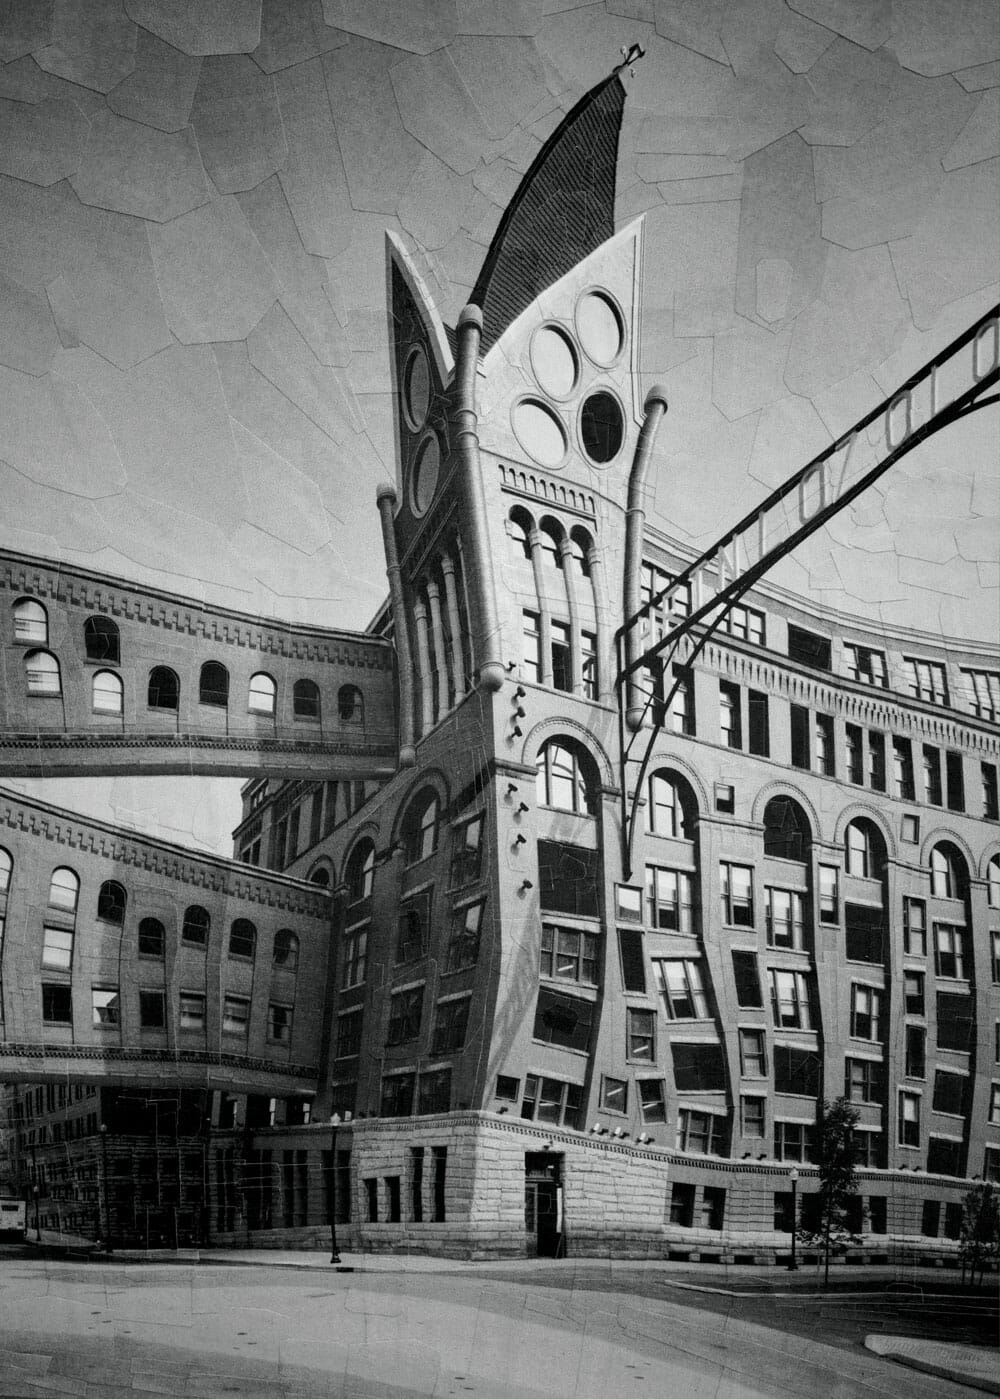 A surrealist greyscale rendering of an industrial building, with mismatched windows placed haphazardly all over. Two skyways connect it to another, unseen building.